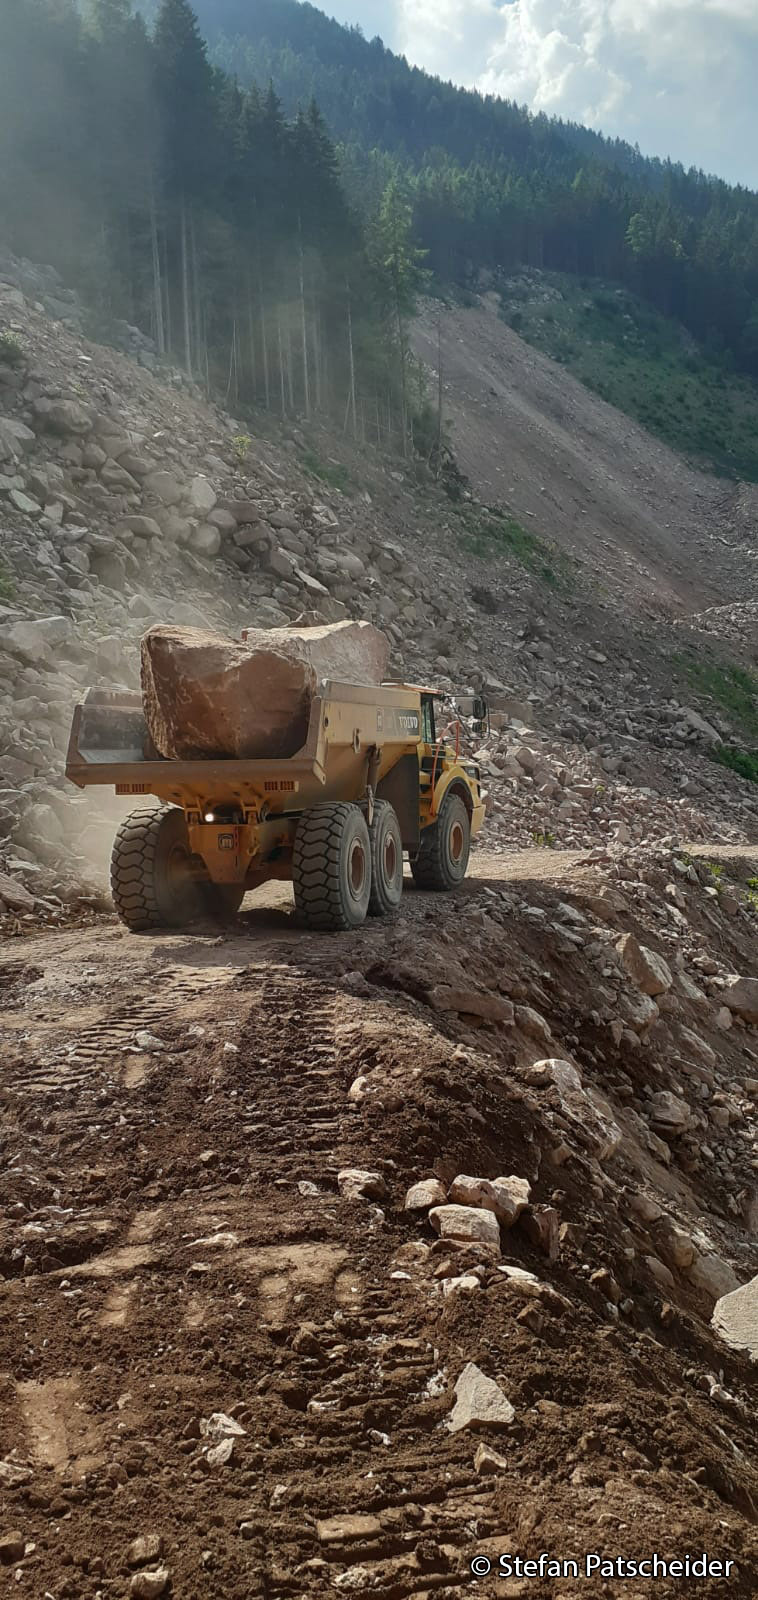 Honorable mention photo by Stefan Patscheider: Mining truck carrying large boulders along a dirt road in a quartz porphyry quarry